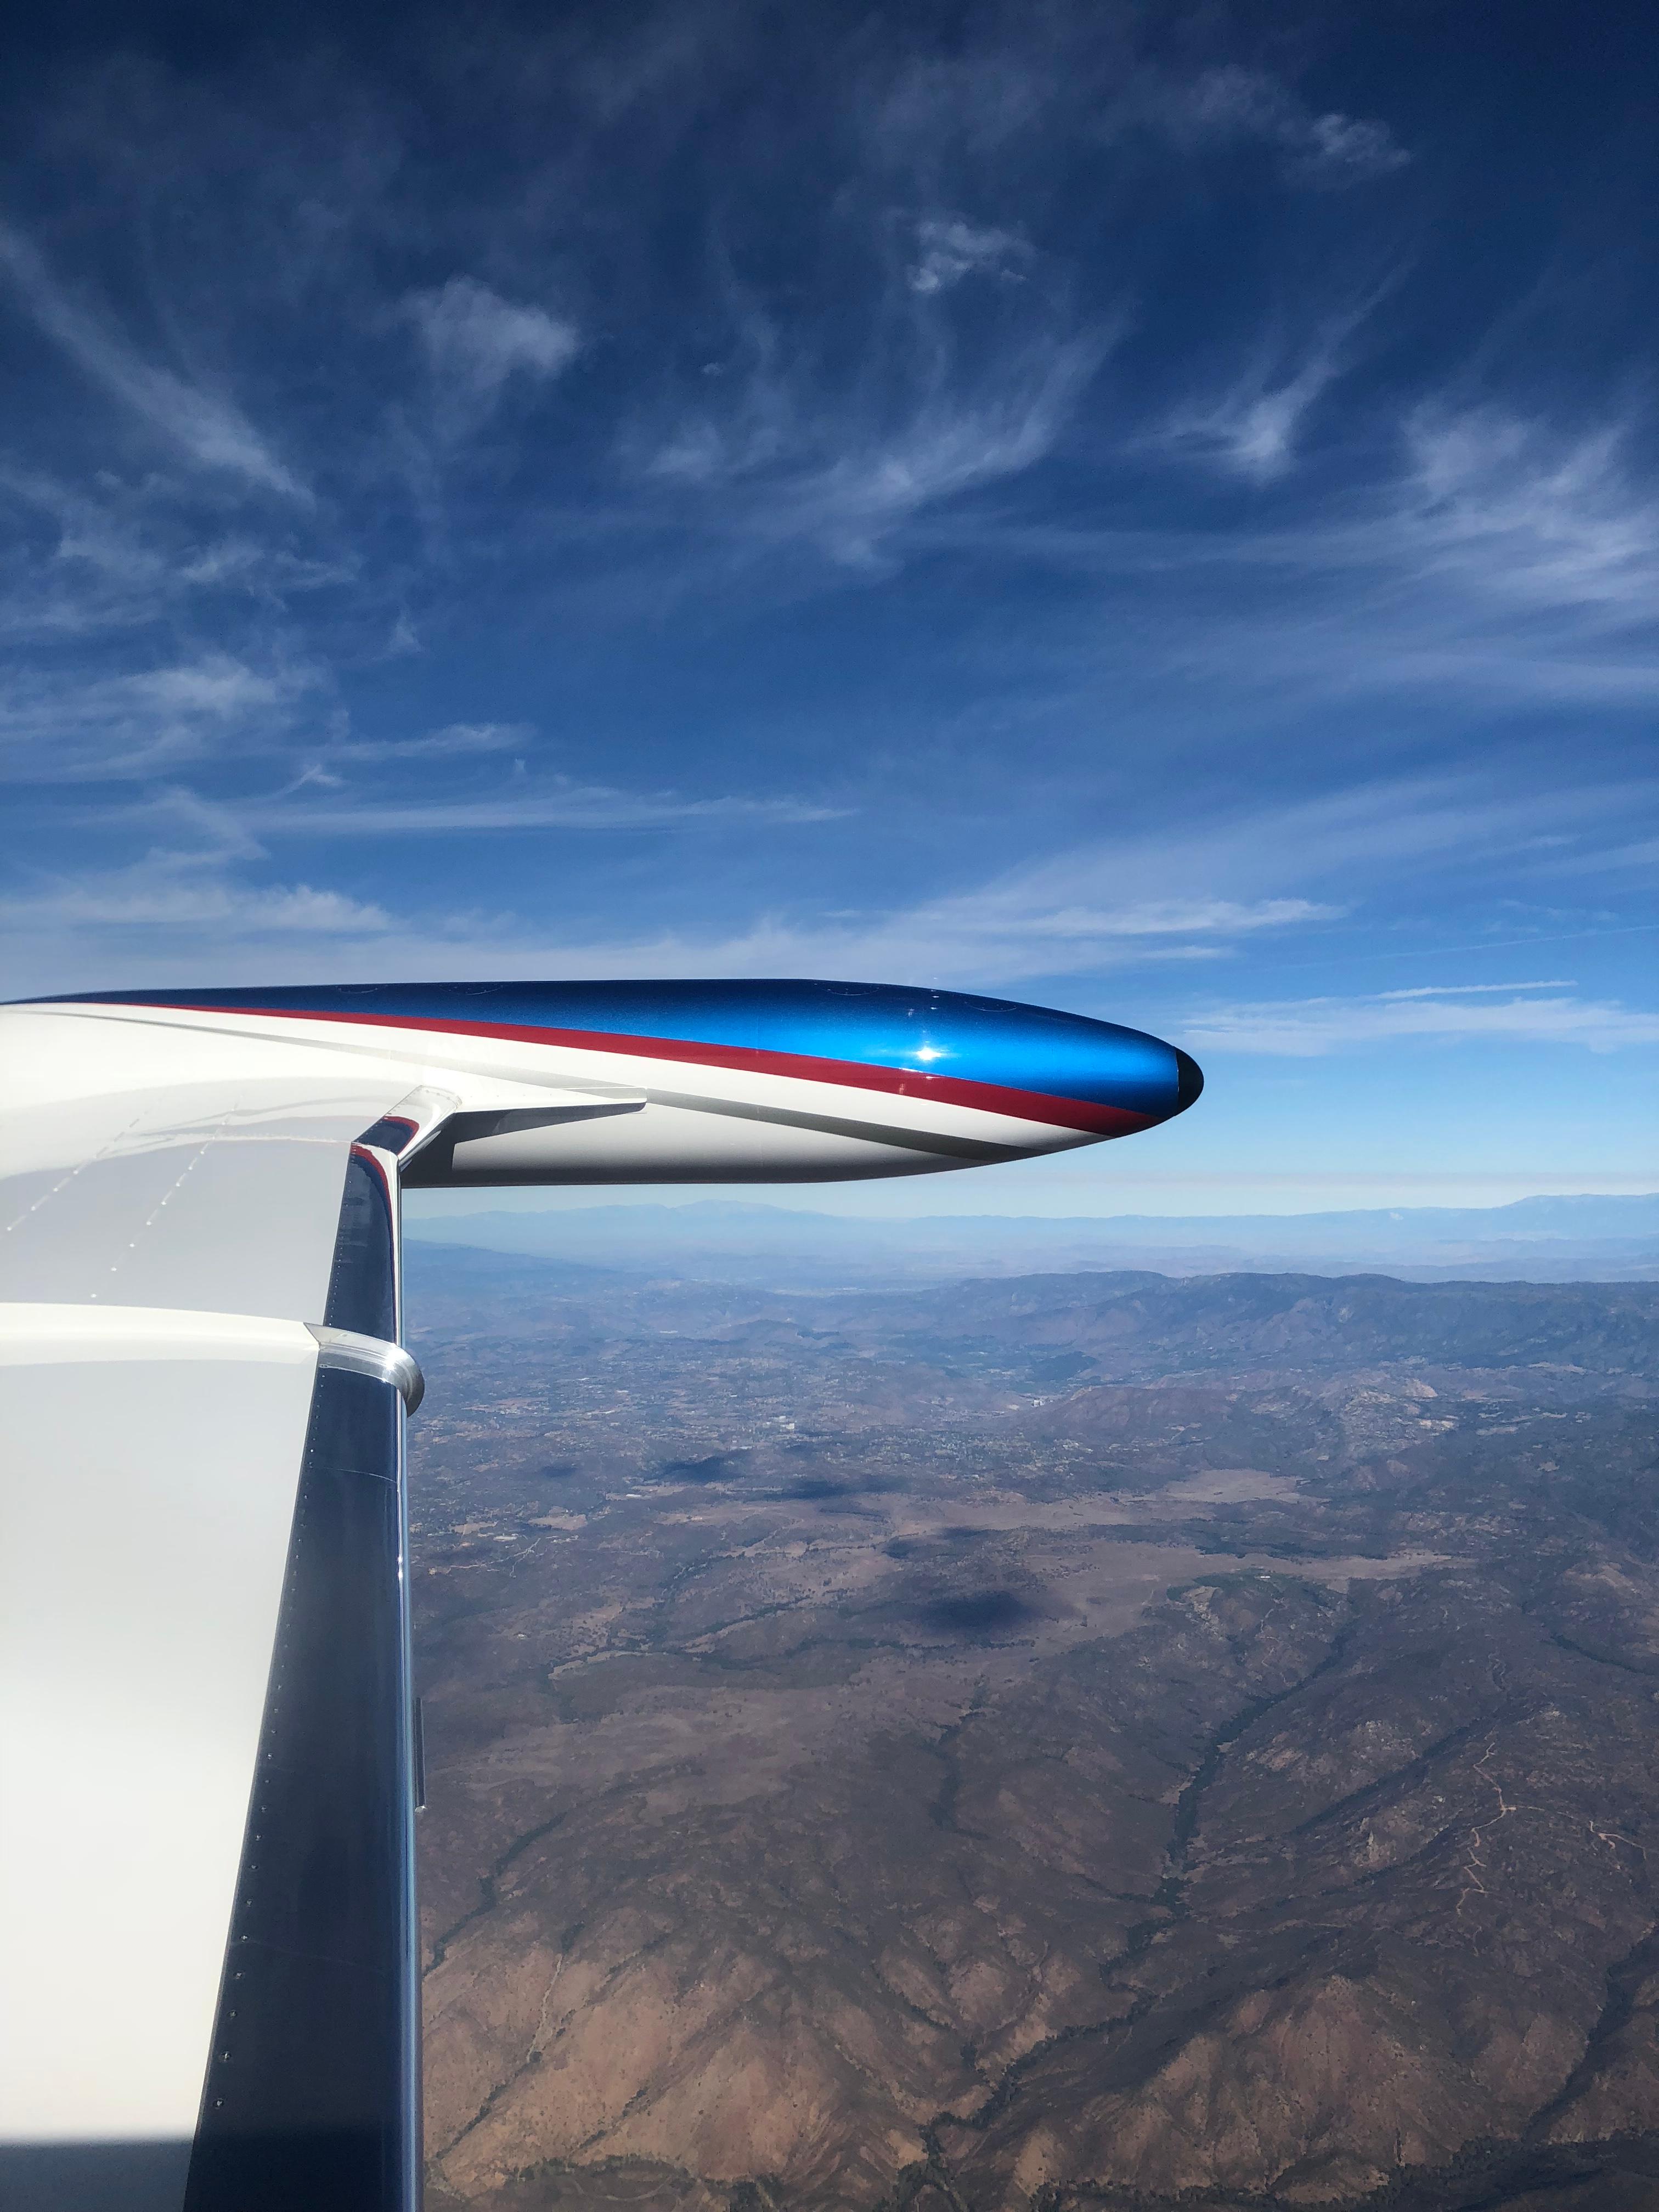 Aeromedevac wing with red, white and blue colors flying to safe medical transport of a patient